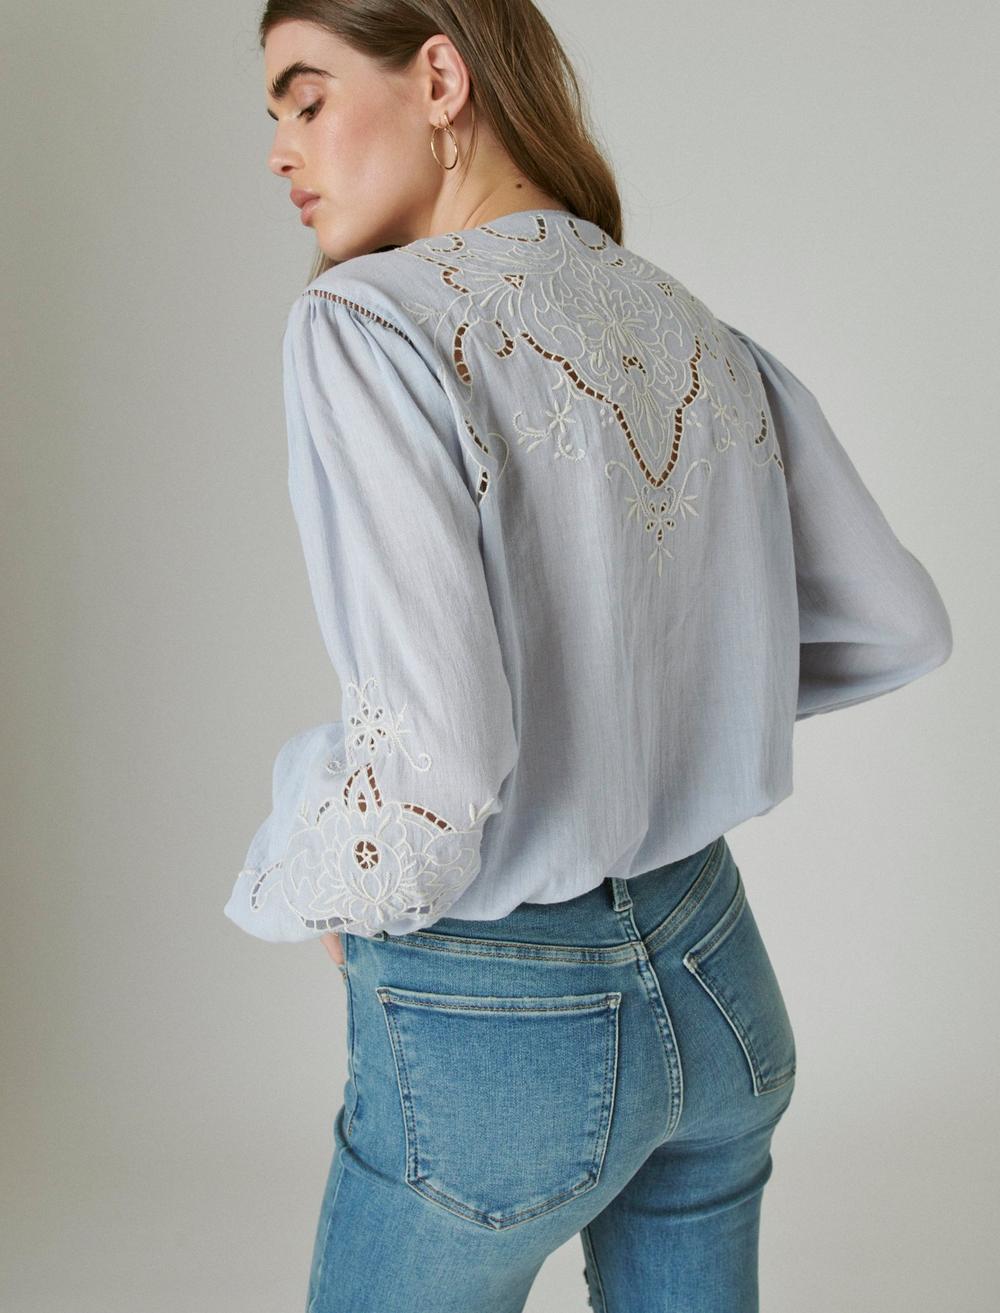 EMBROIDERED PEASANT BLOUSE, image 5